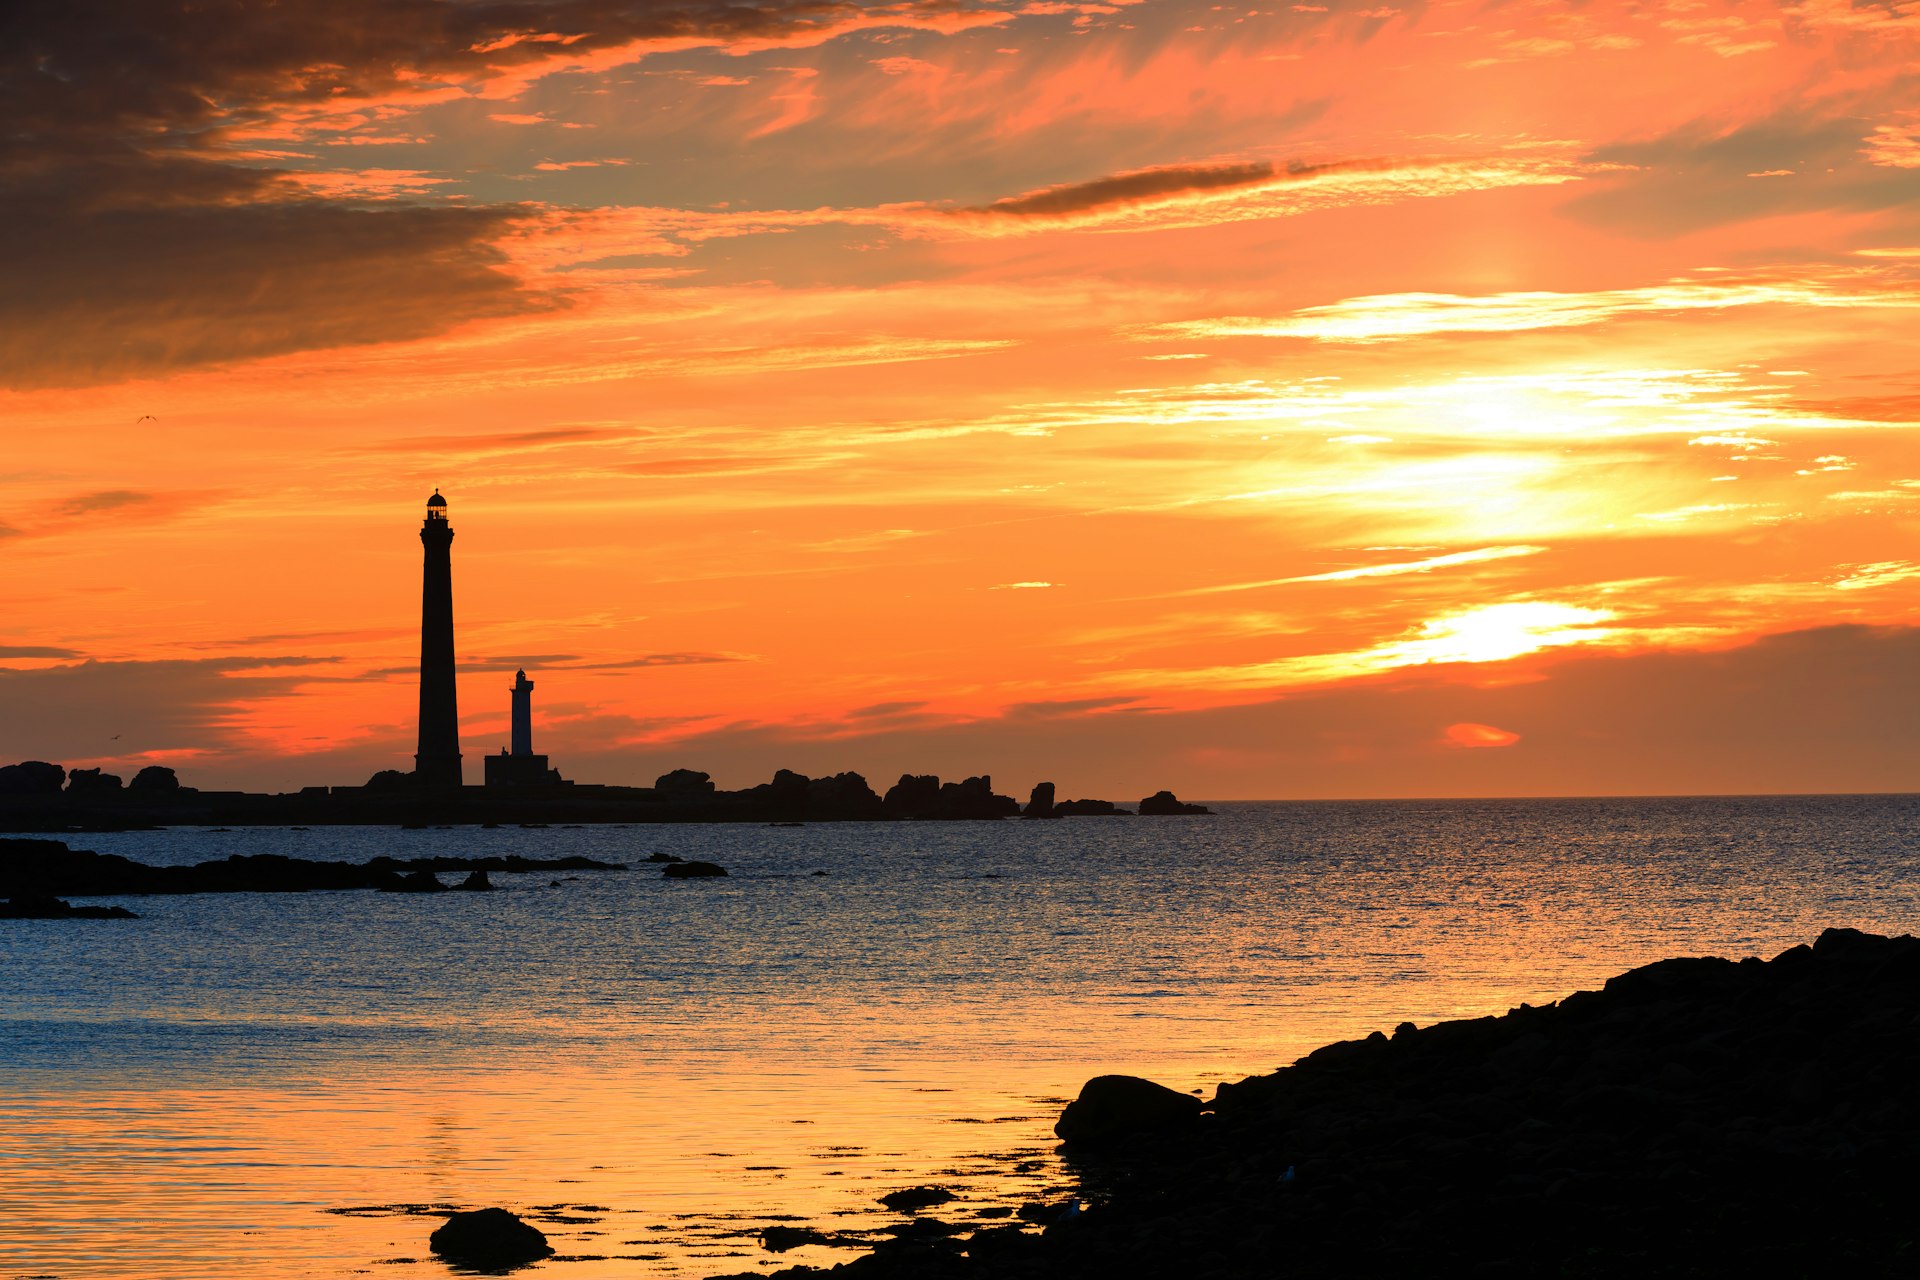 Two lighthouses, one significantly taller than the other, are silhouetted at sunset